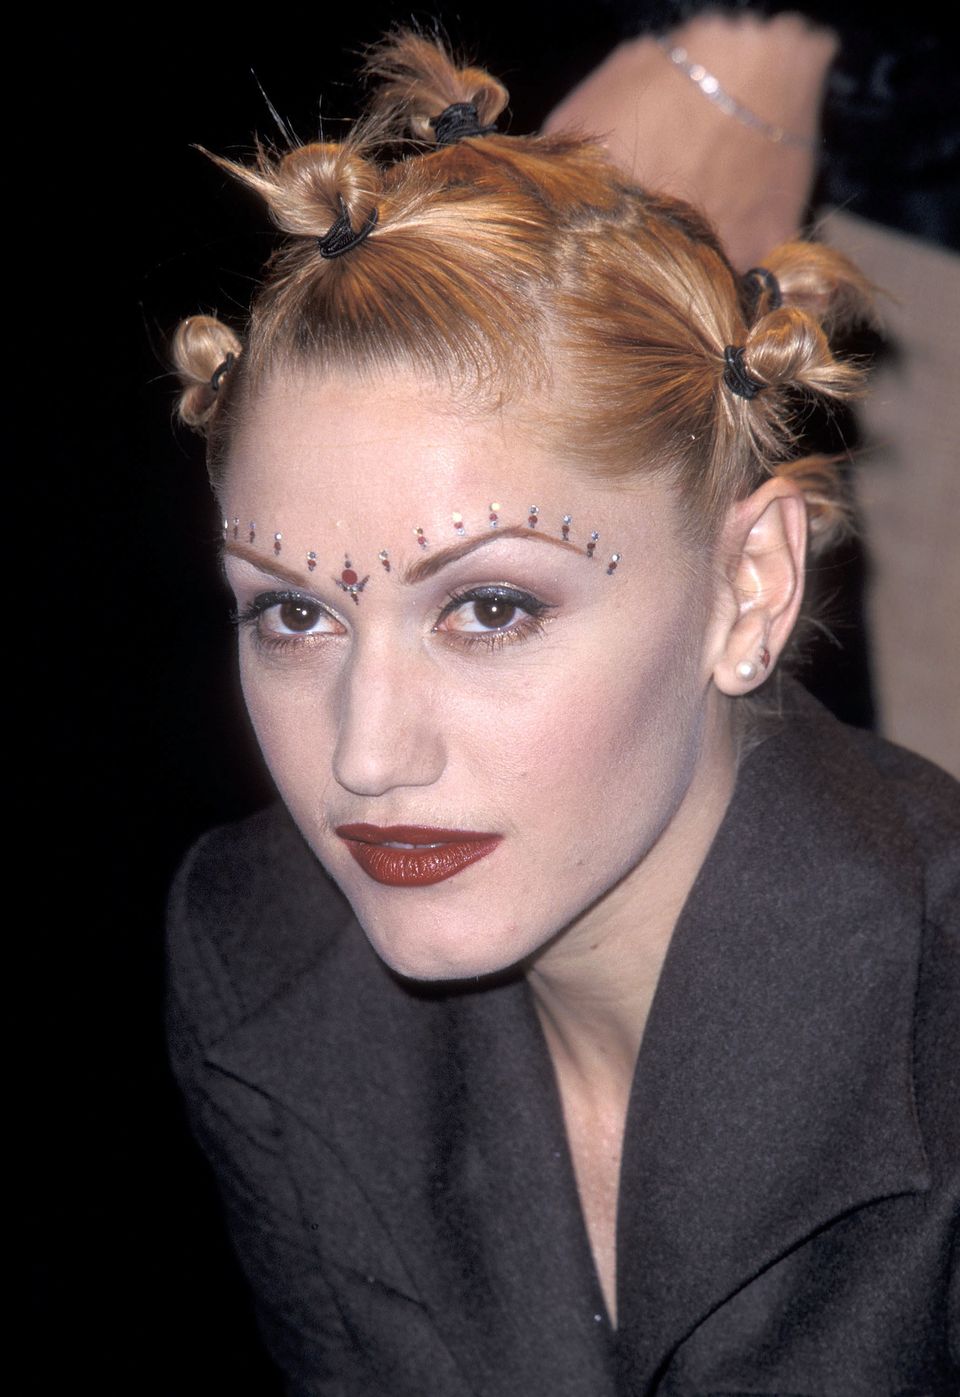 90s hairstyles we thought were absolutely cool (photos